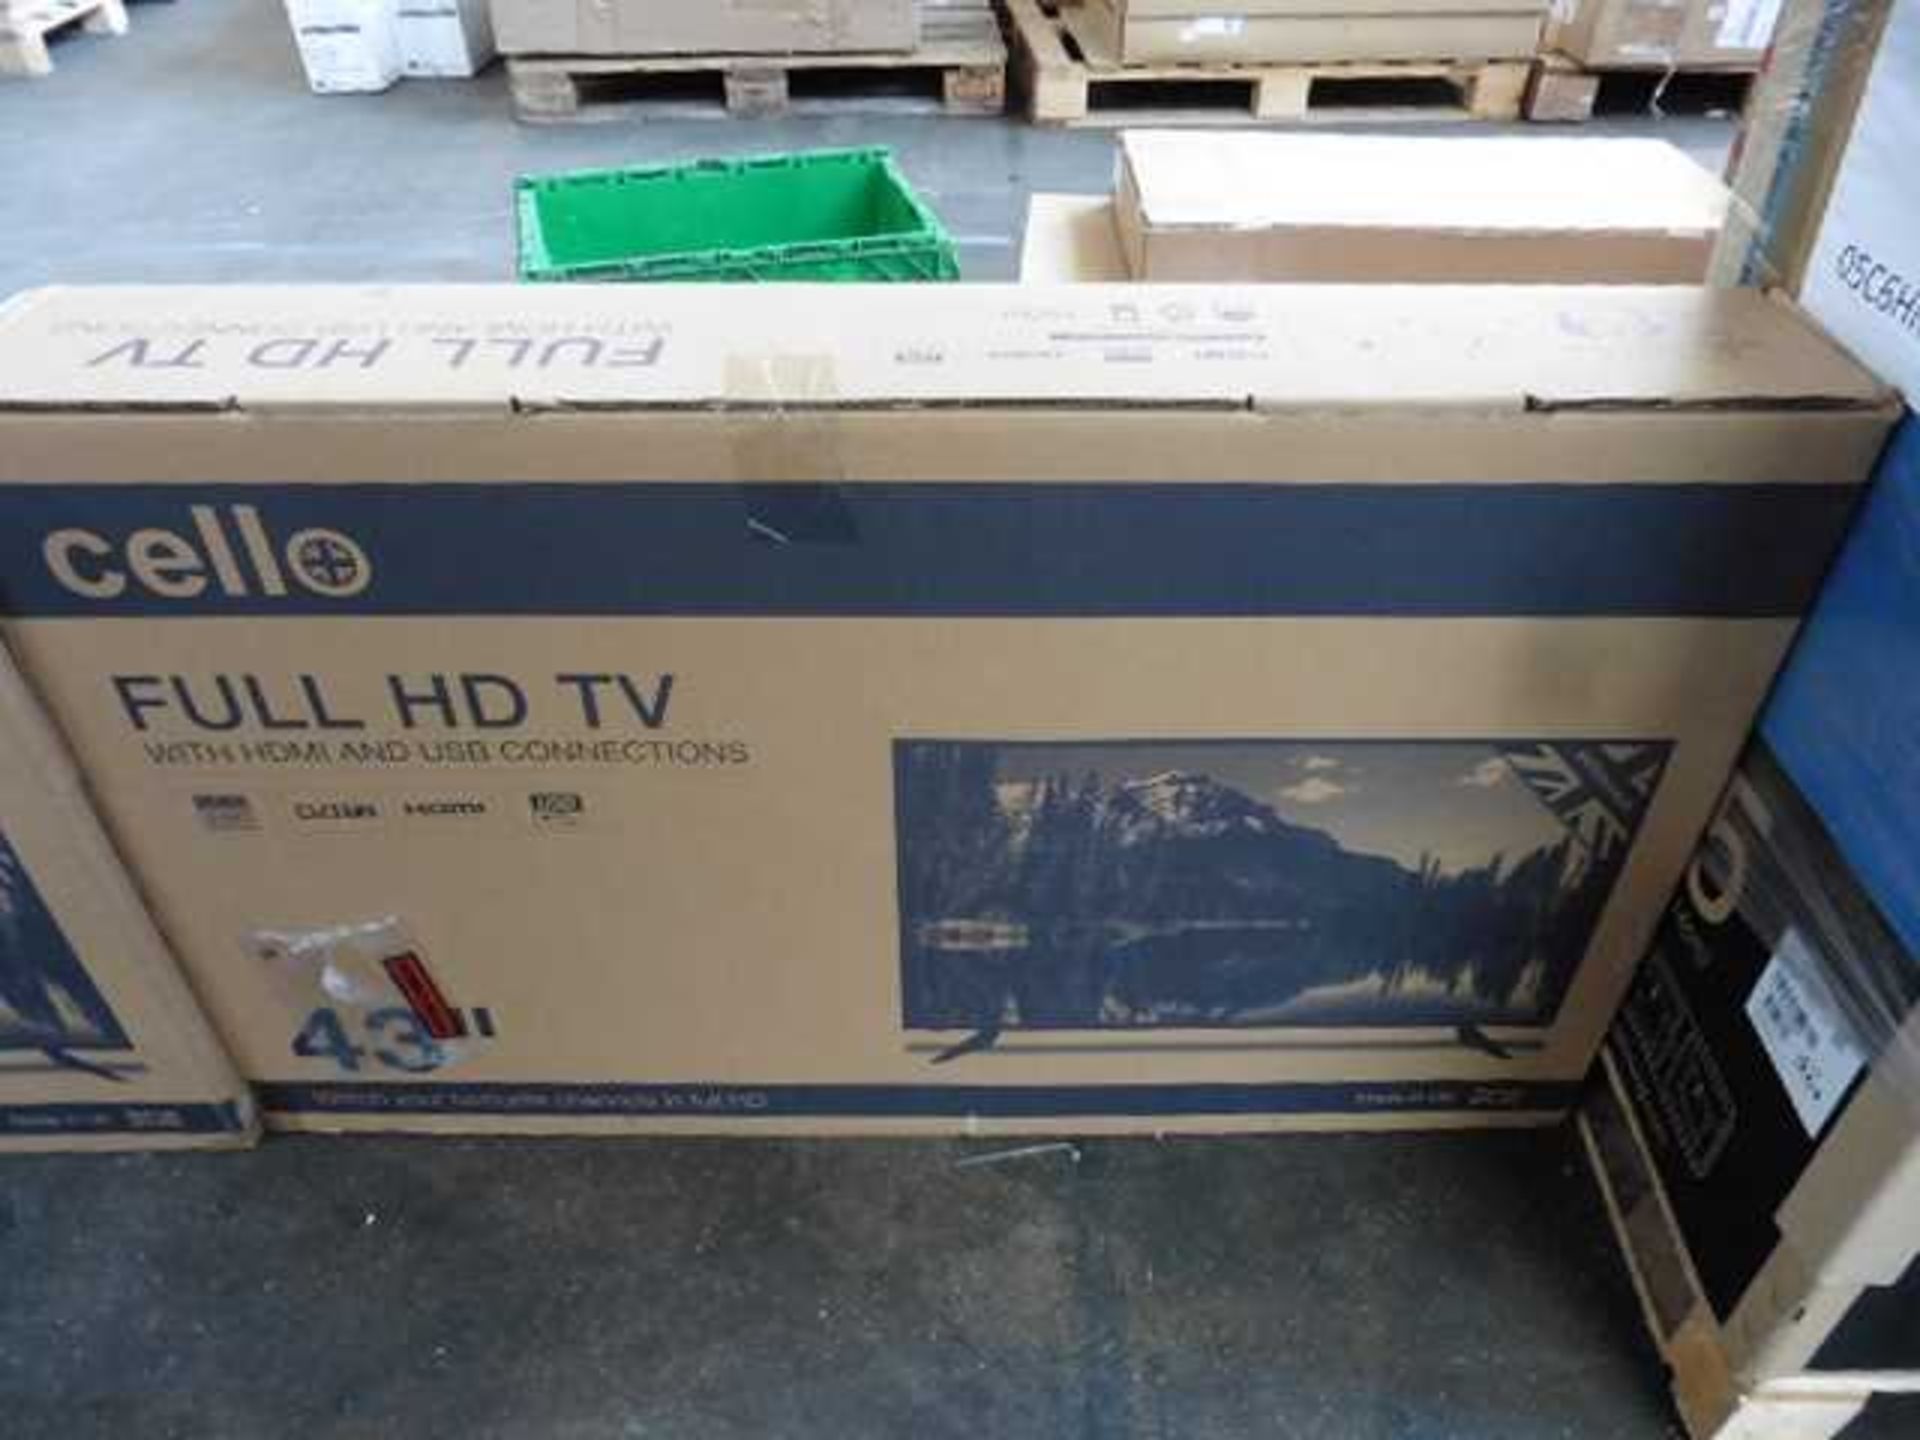 +VAT Cello 43" full HD TV with HDMI and USB connections in box